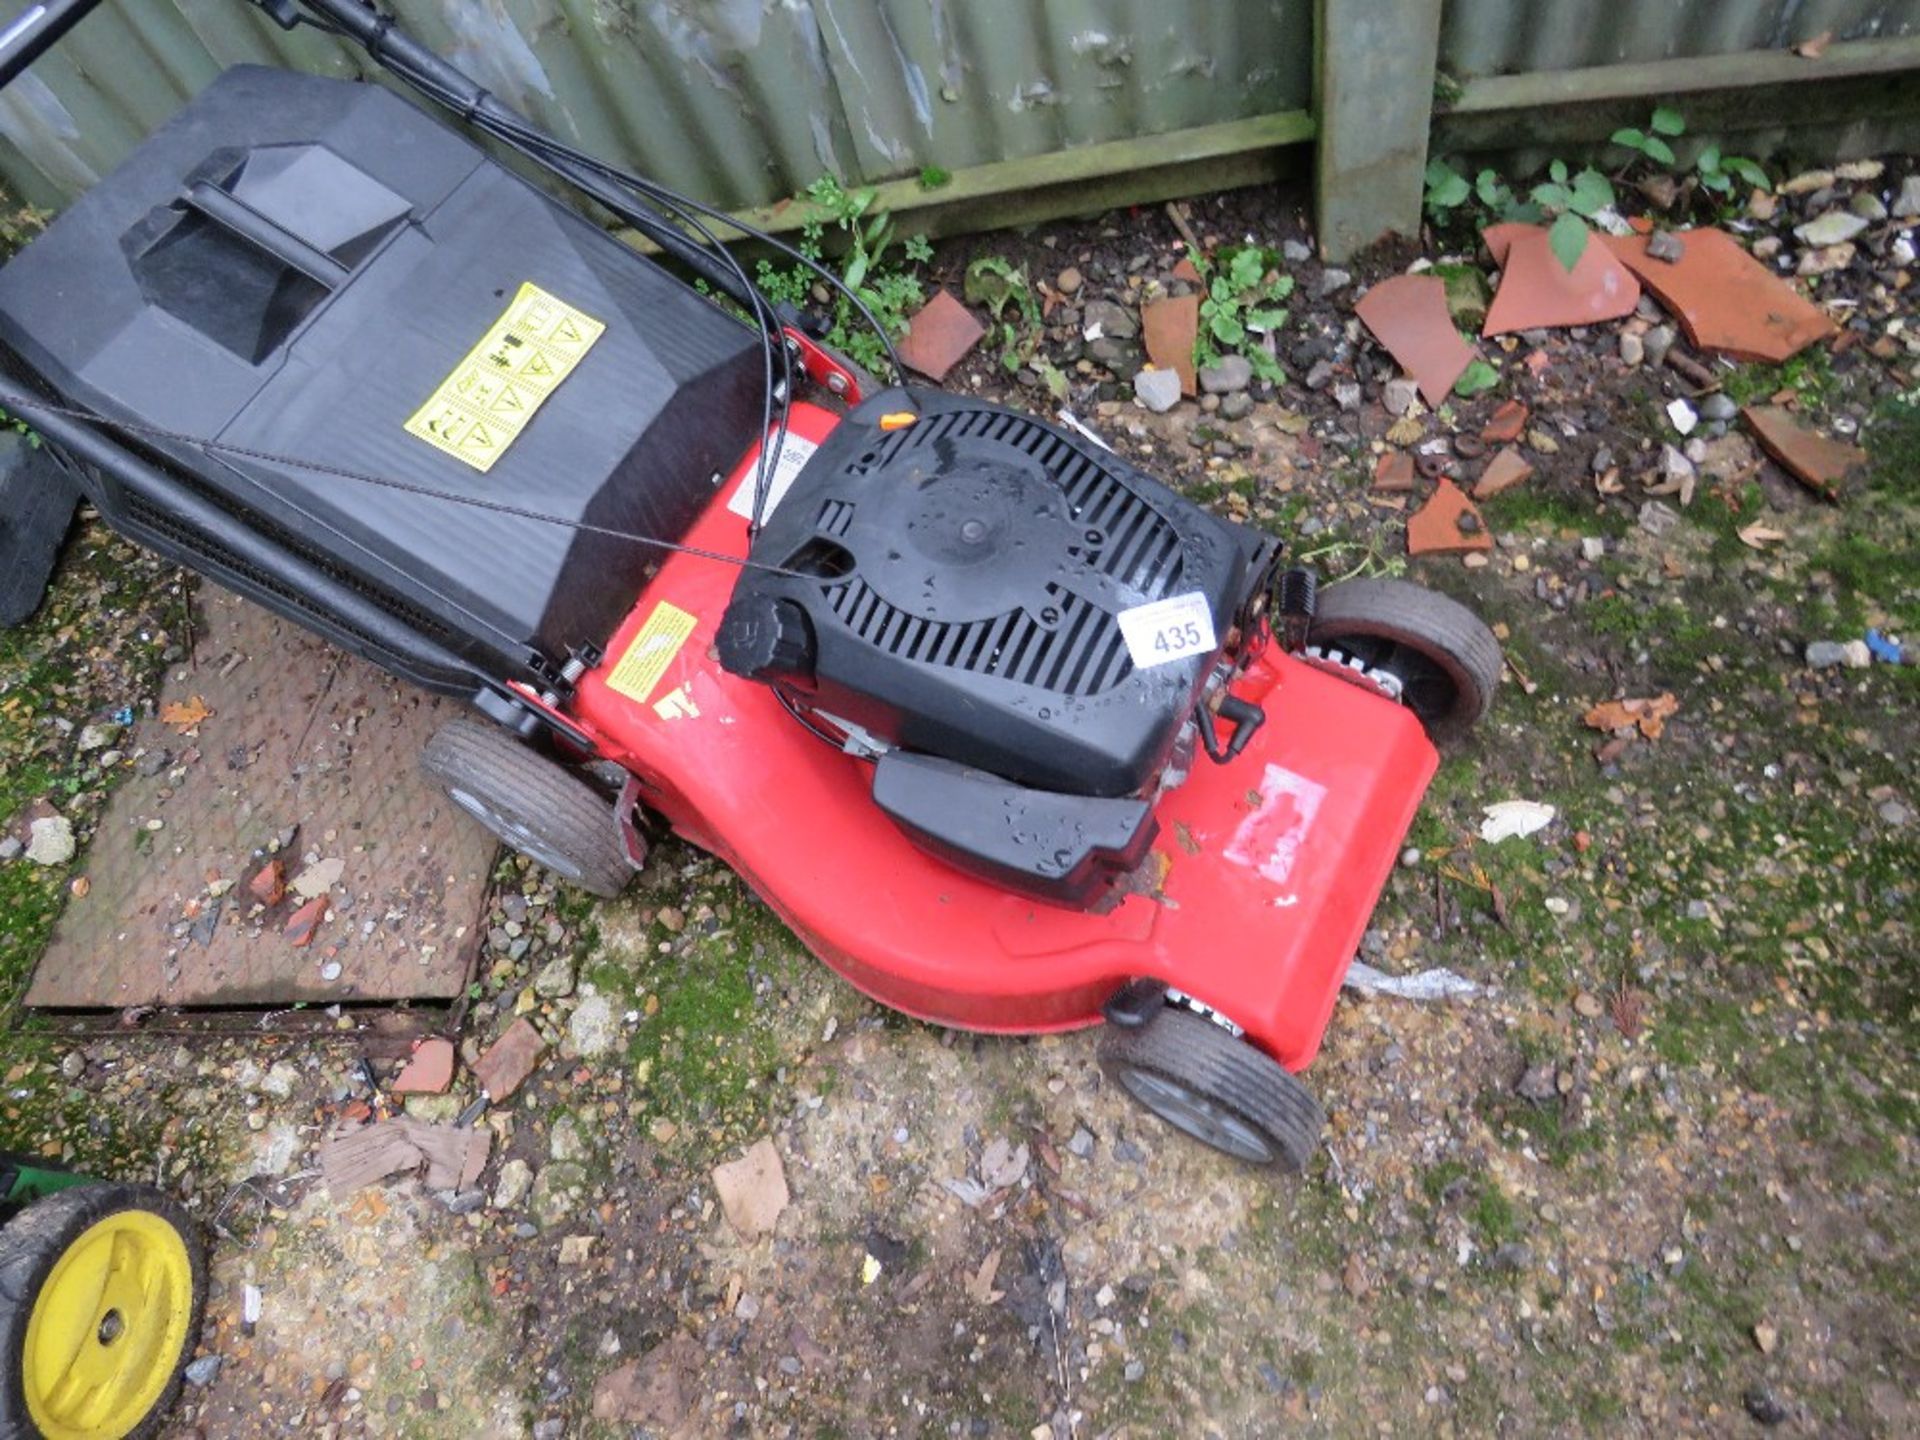 RED PETROL ENGINED LAWN MOWER, WITH BOX. THIS LOT IS SOLD UNDER THE AUCTIONEERS MARGIN SCHEME, TH